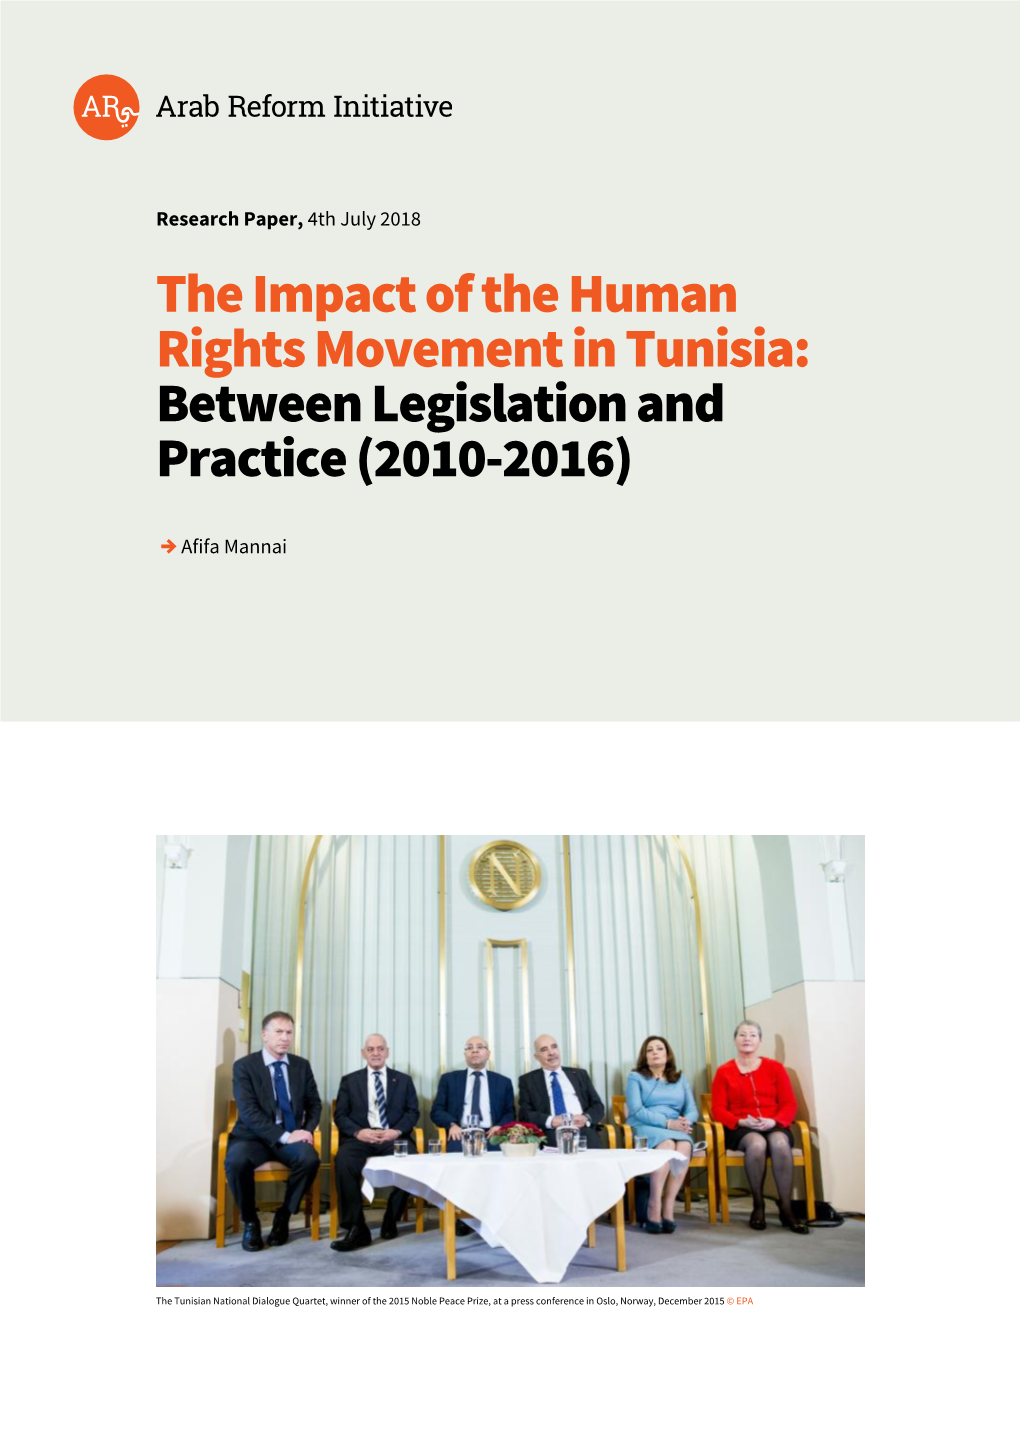 The Impact of the Human Rights Movement in Tunisia: Between Legislation and Practice (2010-2016)